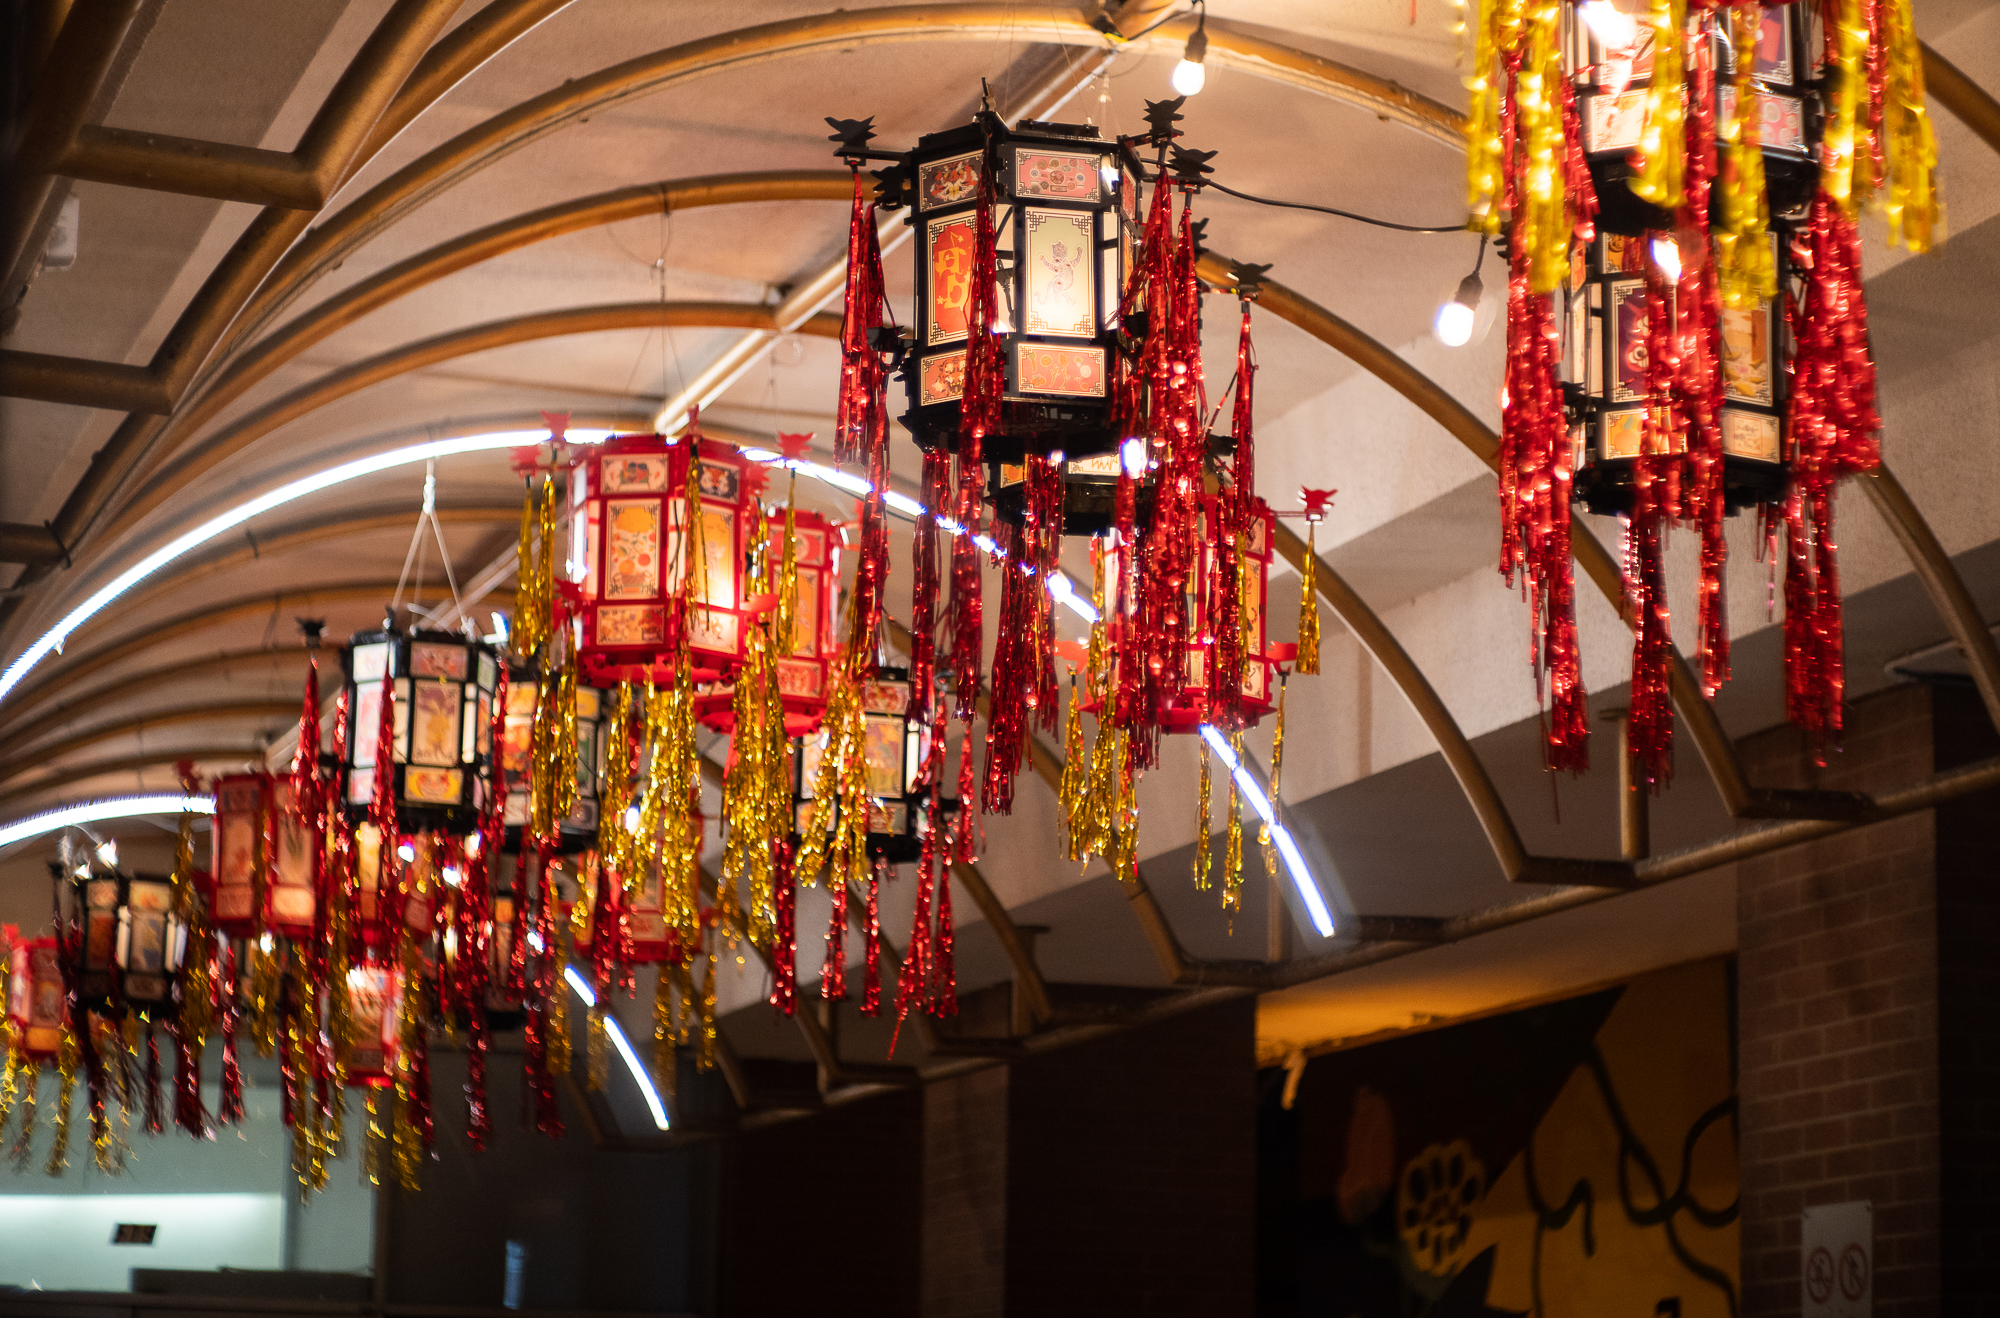 ID3: Horizontal photo of 20 palace lanterns in red and black acrylic holding community artwork for Yue Moon. The lanterns have red and gold tinsel hanging from the corners. They are hanging in an arched pathway at night.